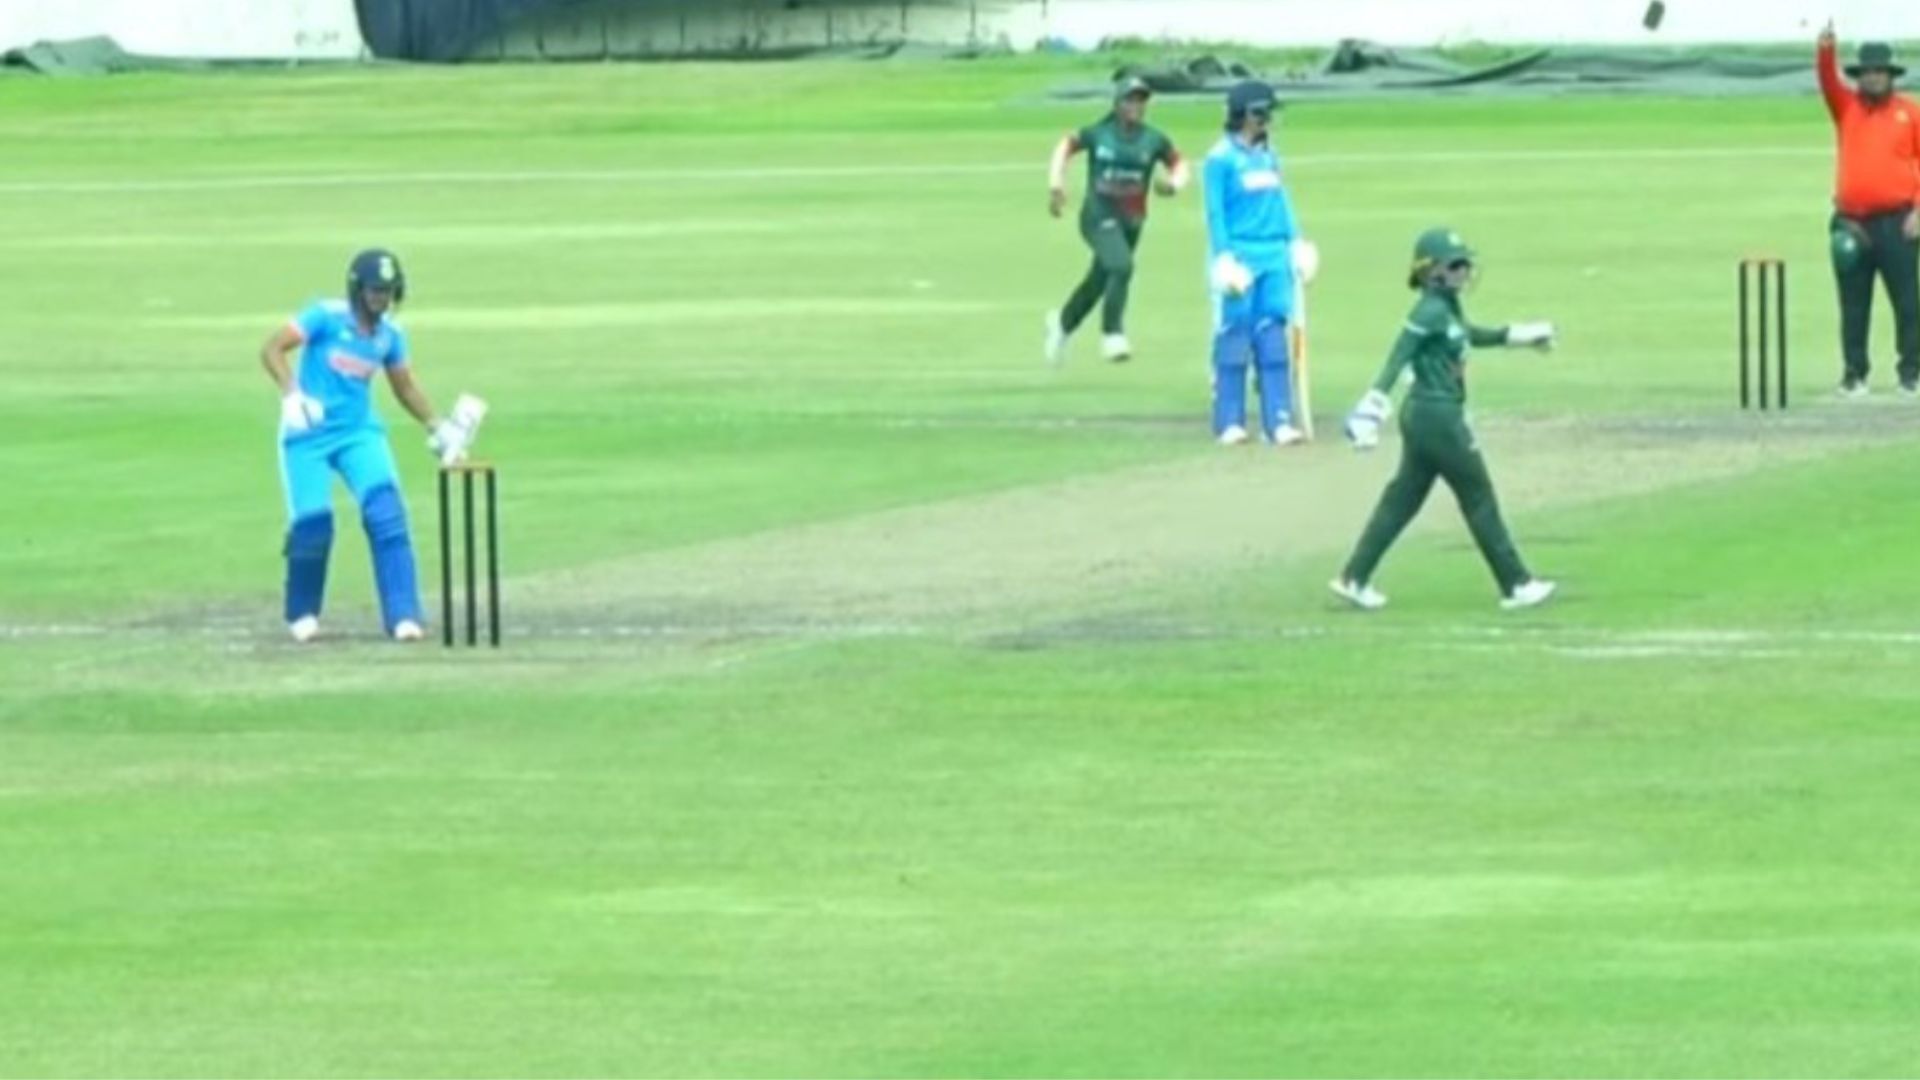 Harmanpreet Kaur smashes the stumps with her bat after being given out during the 3rd ODI against Bangladesh. 